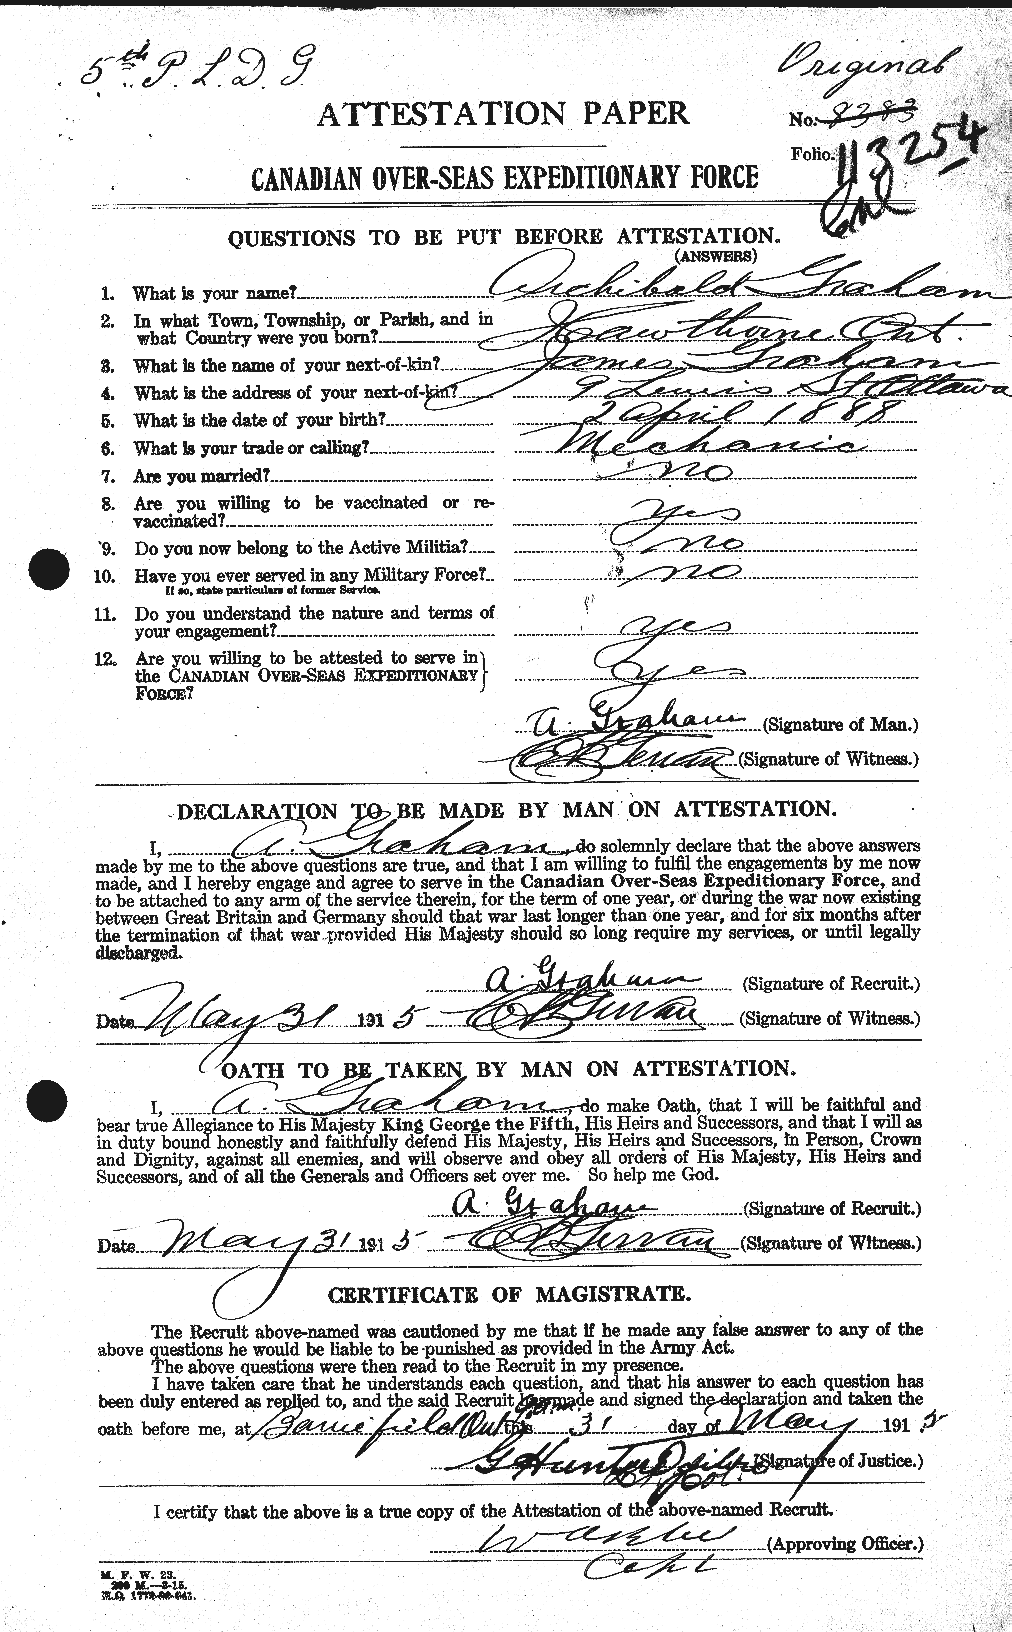 Personnel Records of the First World War - CEF 359634a